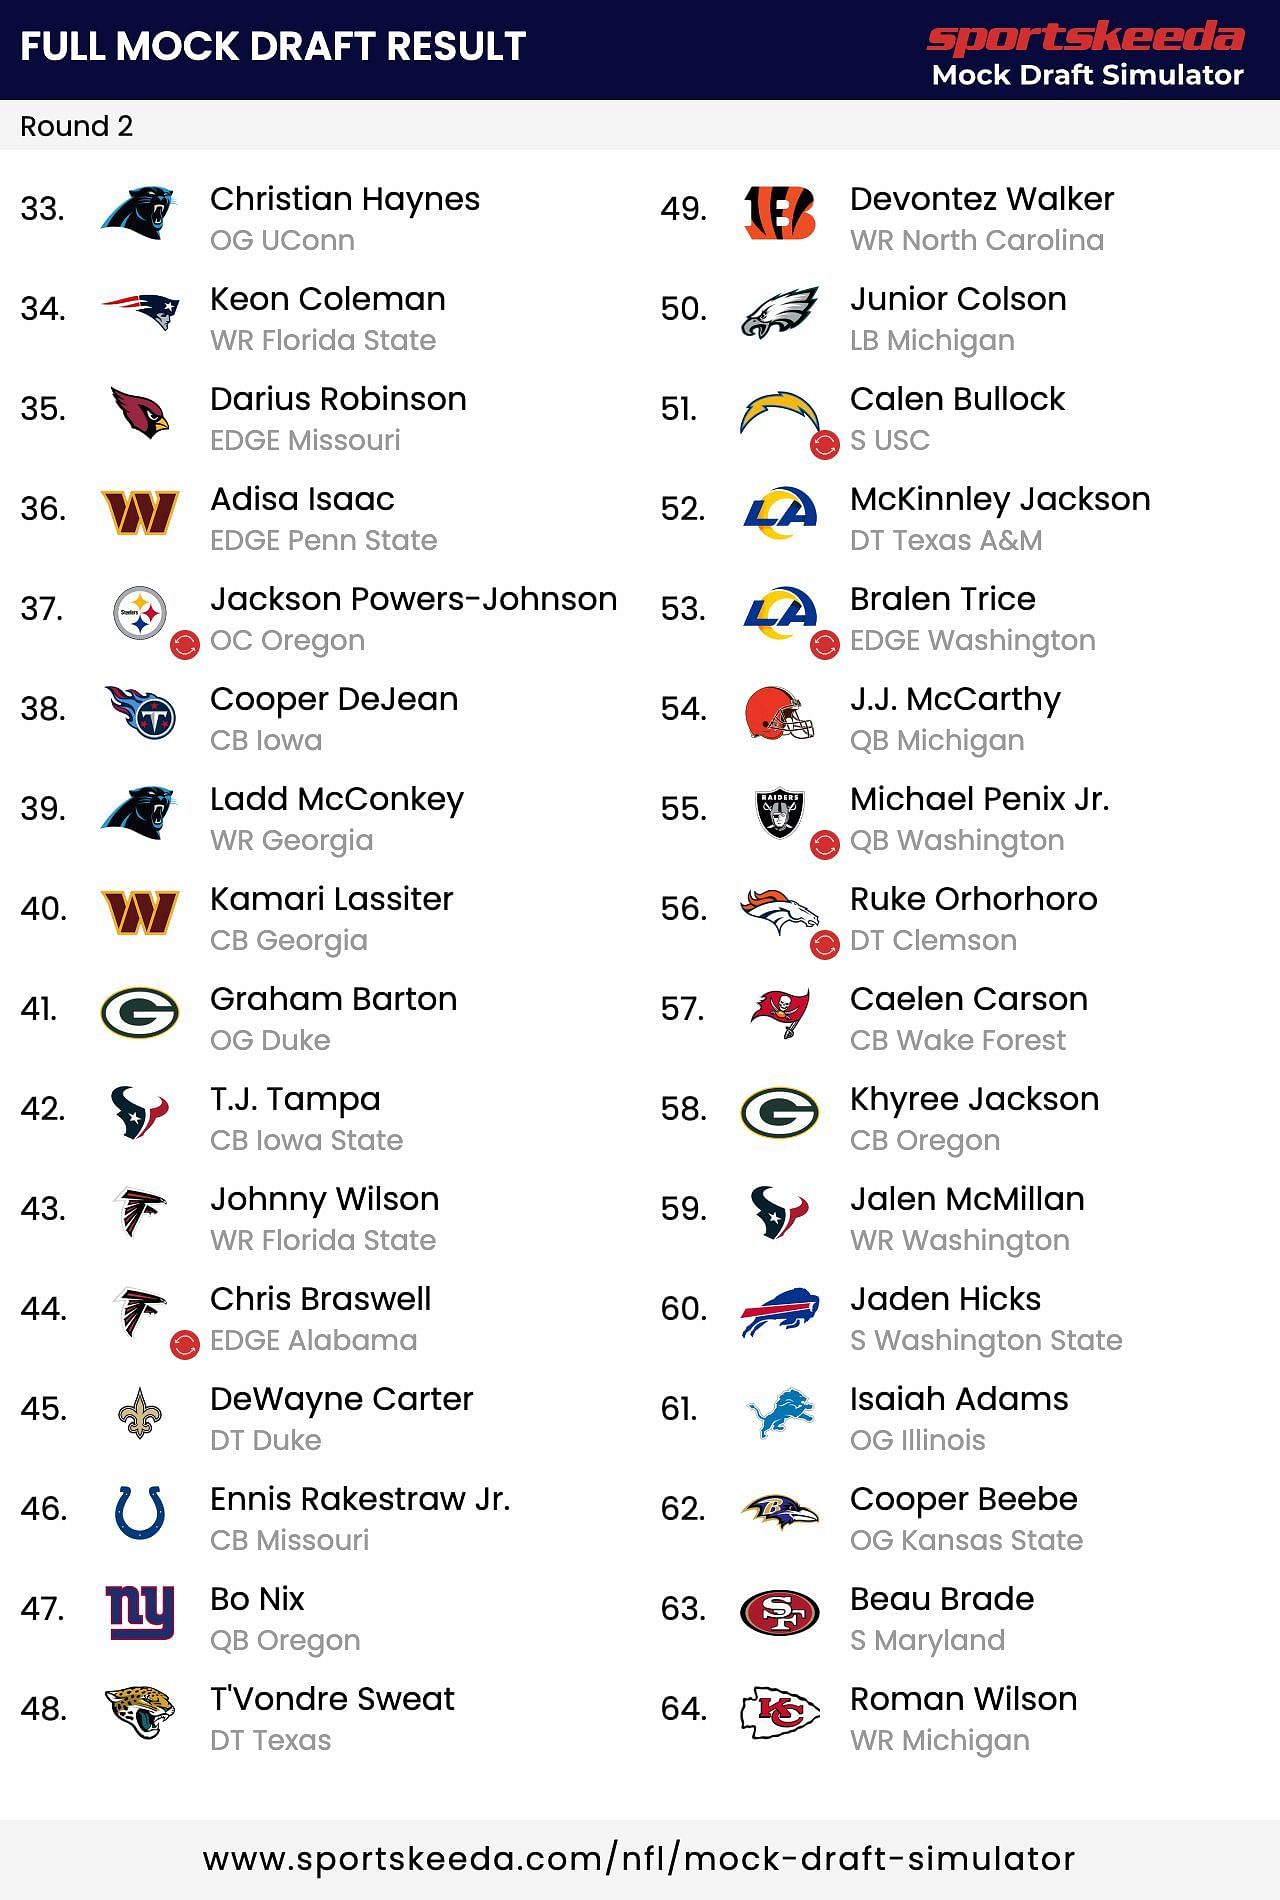 The second round of the NFL mock draft